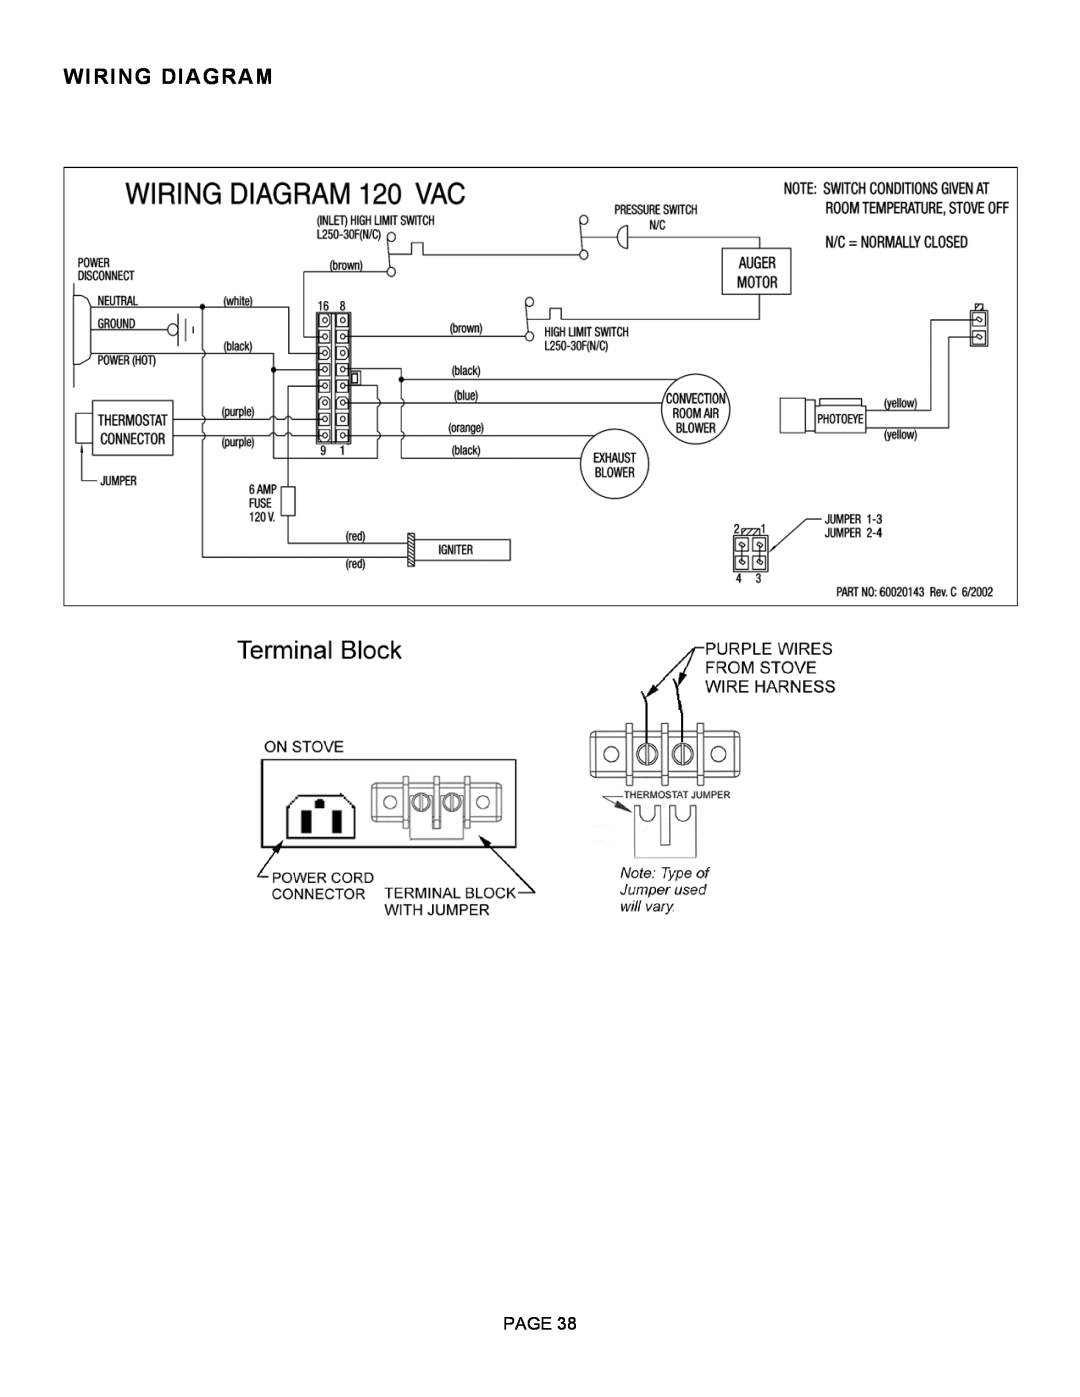 Lenoxx Electronics Optima 3 FS operation manual Wiring Diagram, Page 